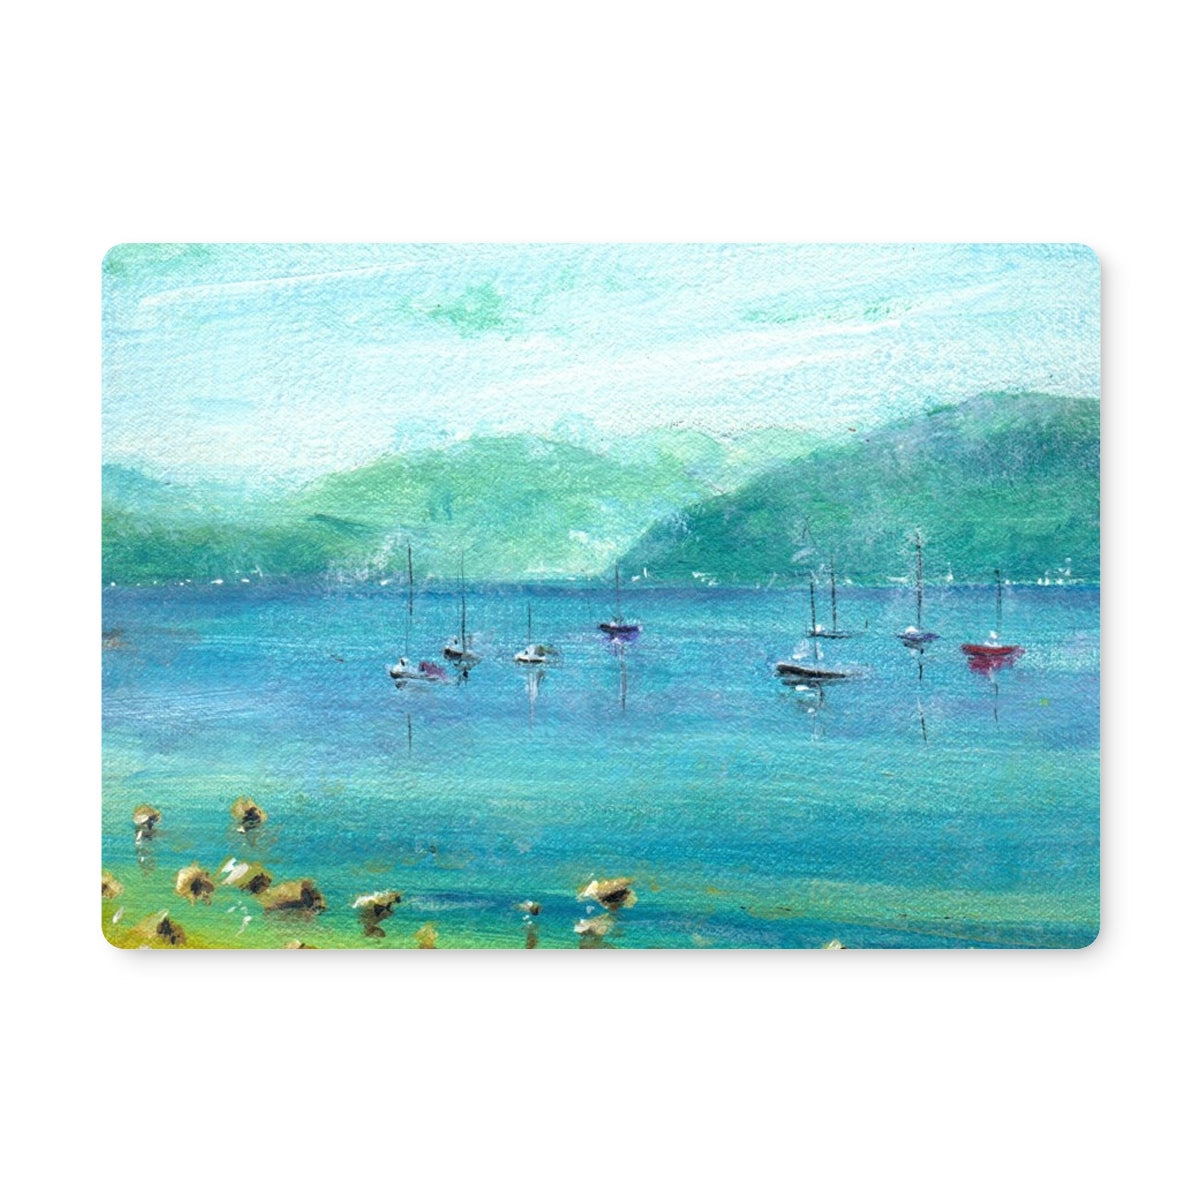 A Clyde Summer Day Art Gifts Placemat-Placemats-River Clyde Art Gallery-Single Placemat-Paintings, Prints, Homeware, Art Gifts From Scotland By Scottish Artist Kevin Hunter